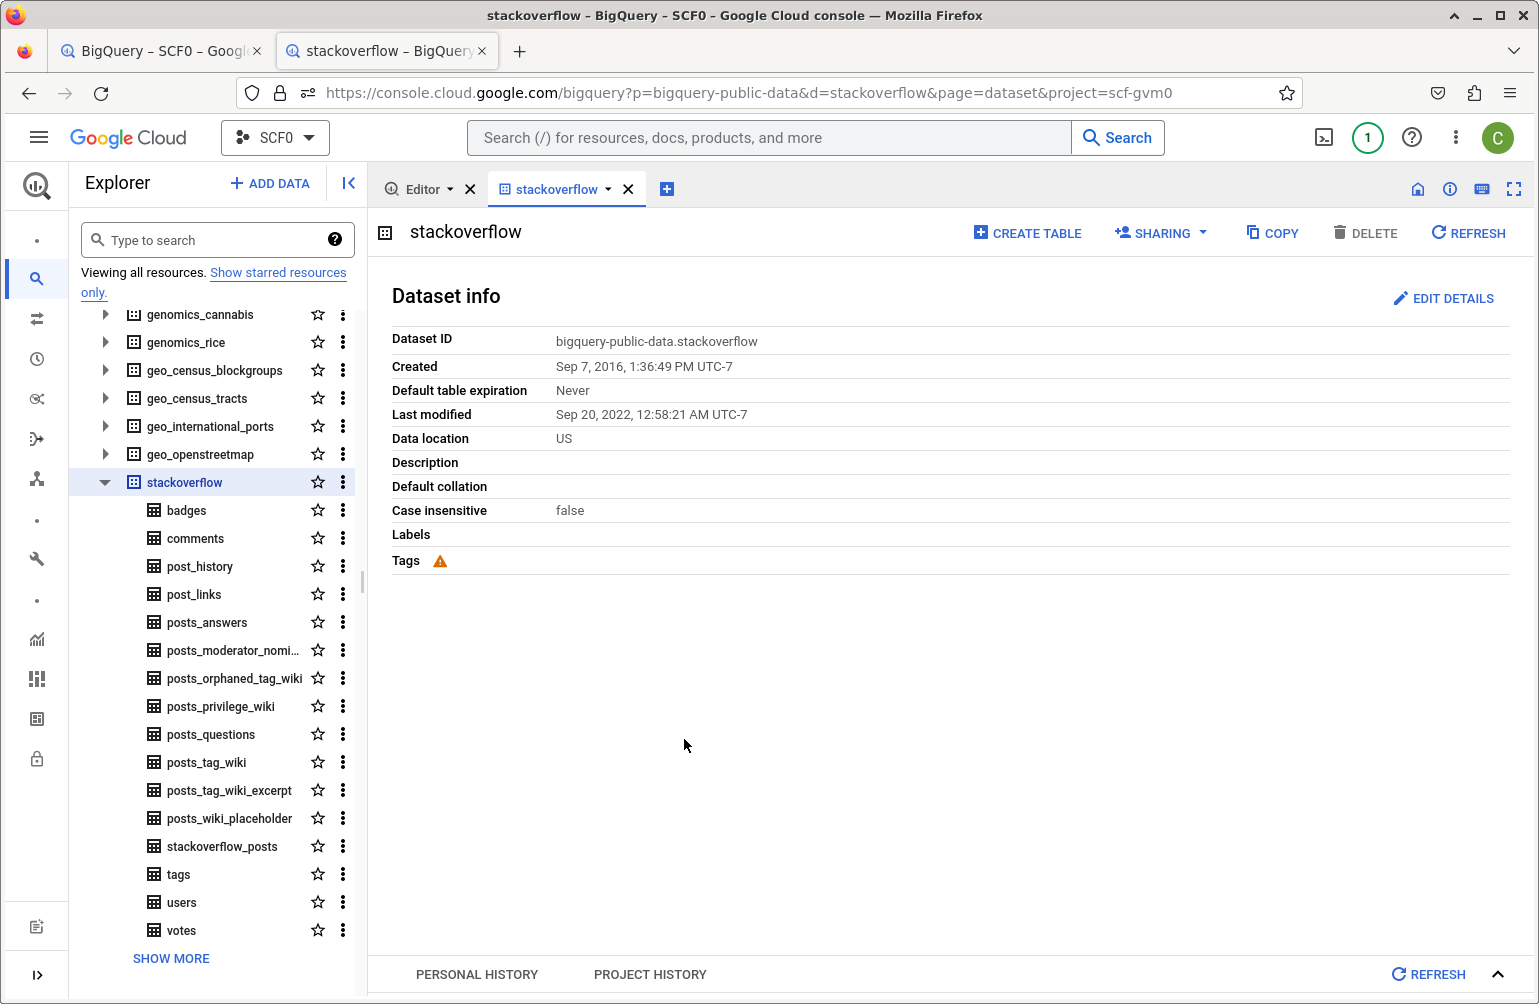 BigQuery interface, showing the SQL Explorer pane highlight the public stackoverflow dataset.